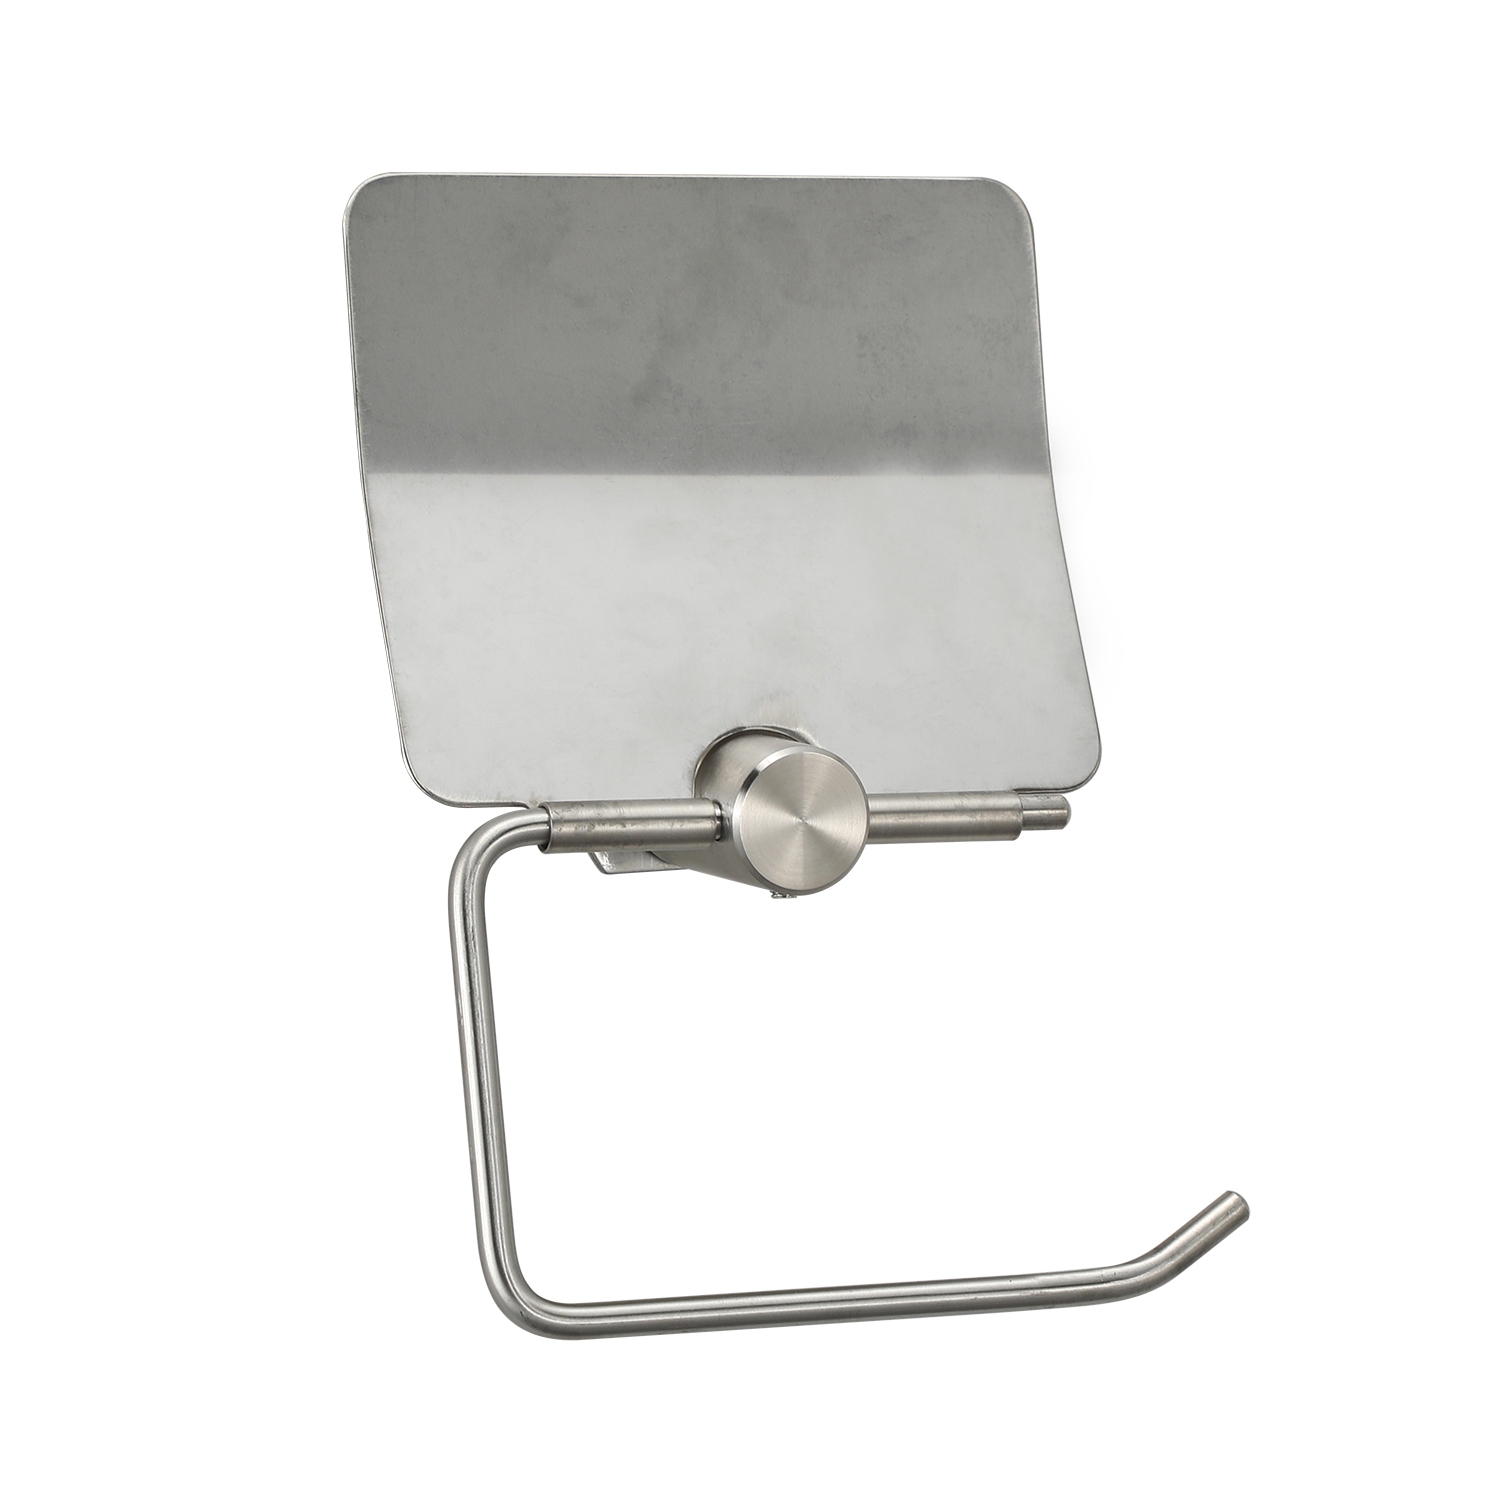 Simple Design Stainless Steel Paper Holder